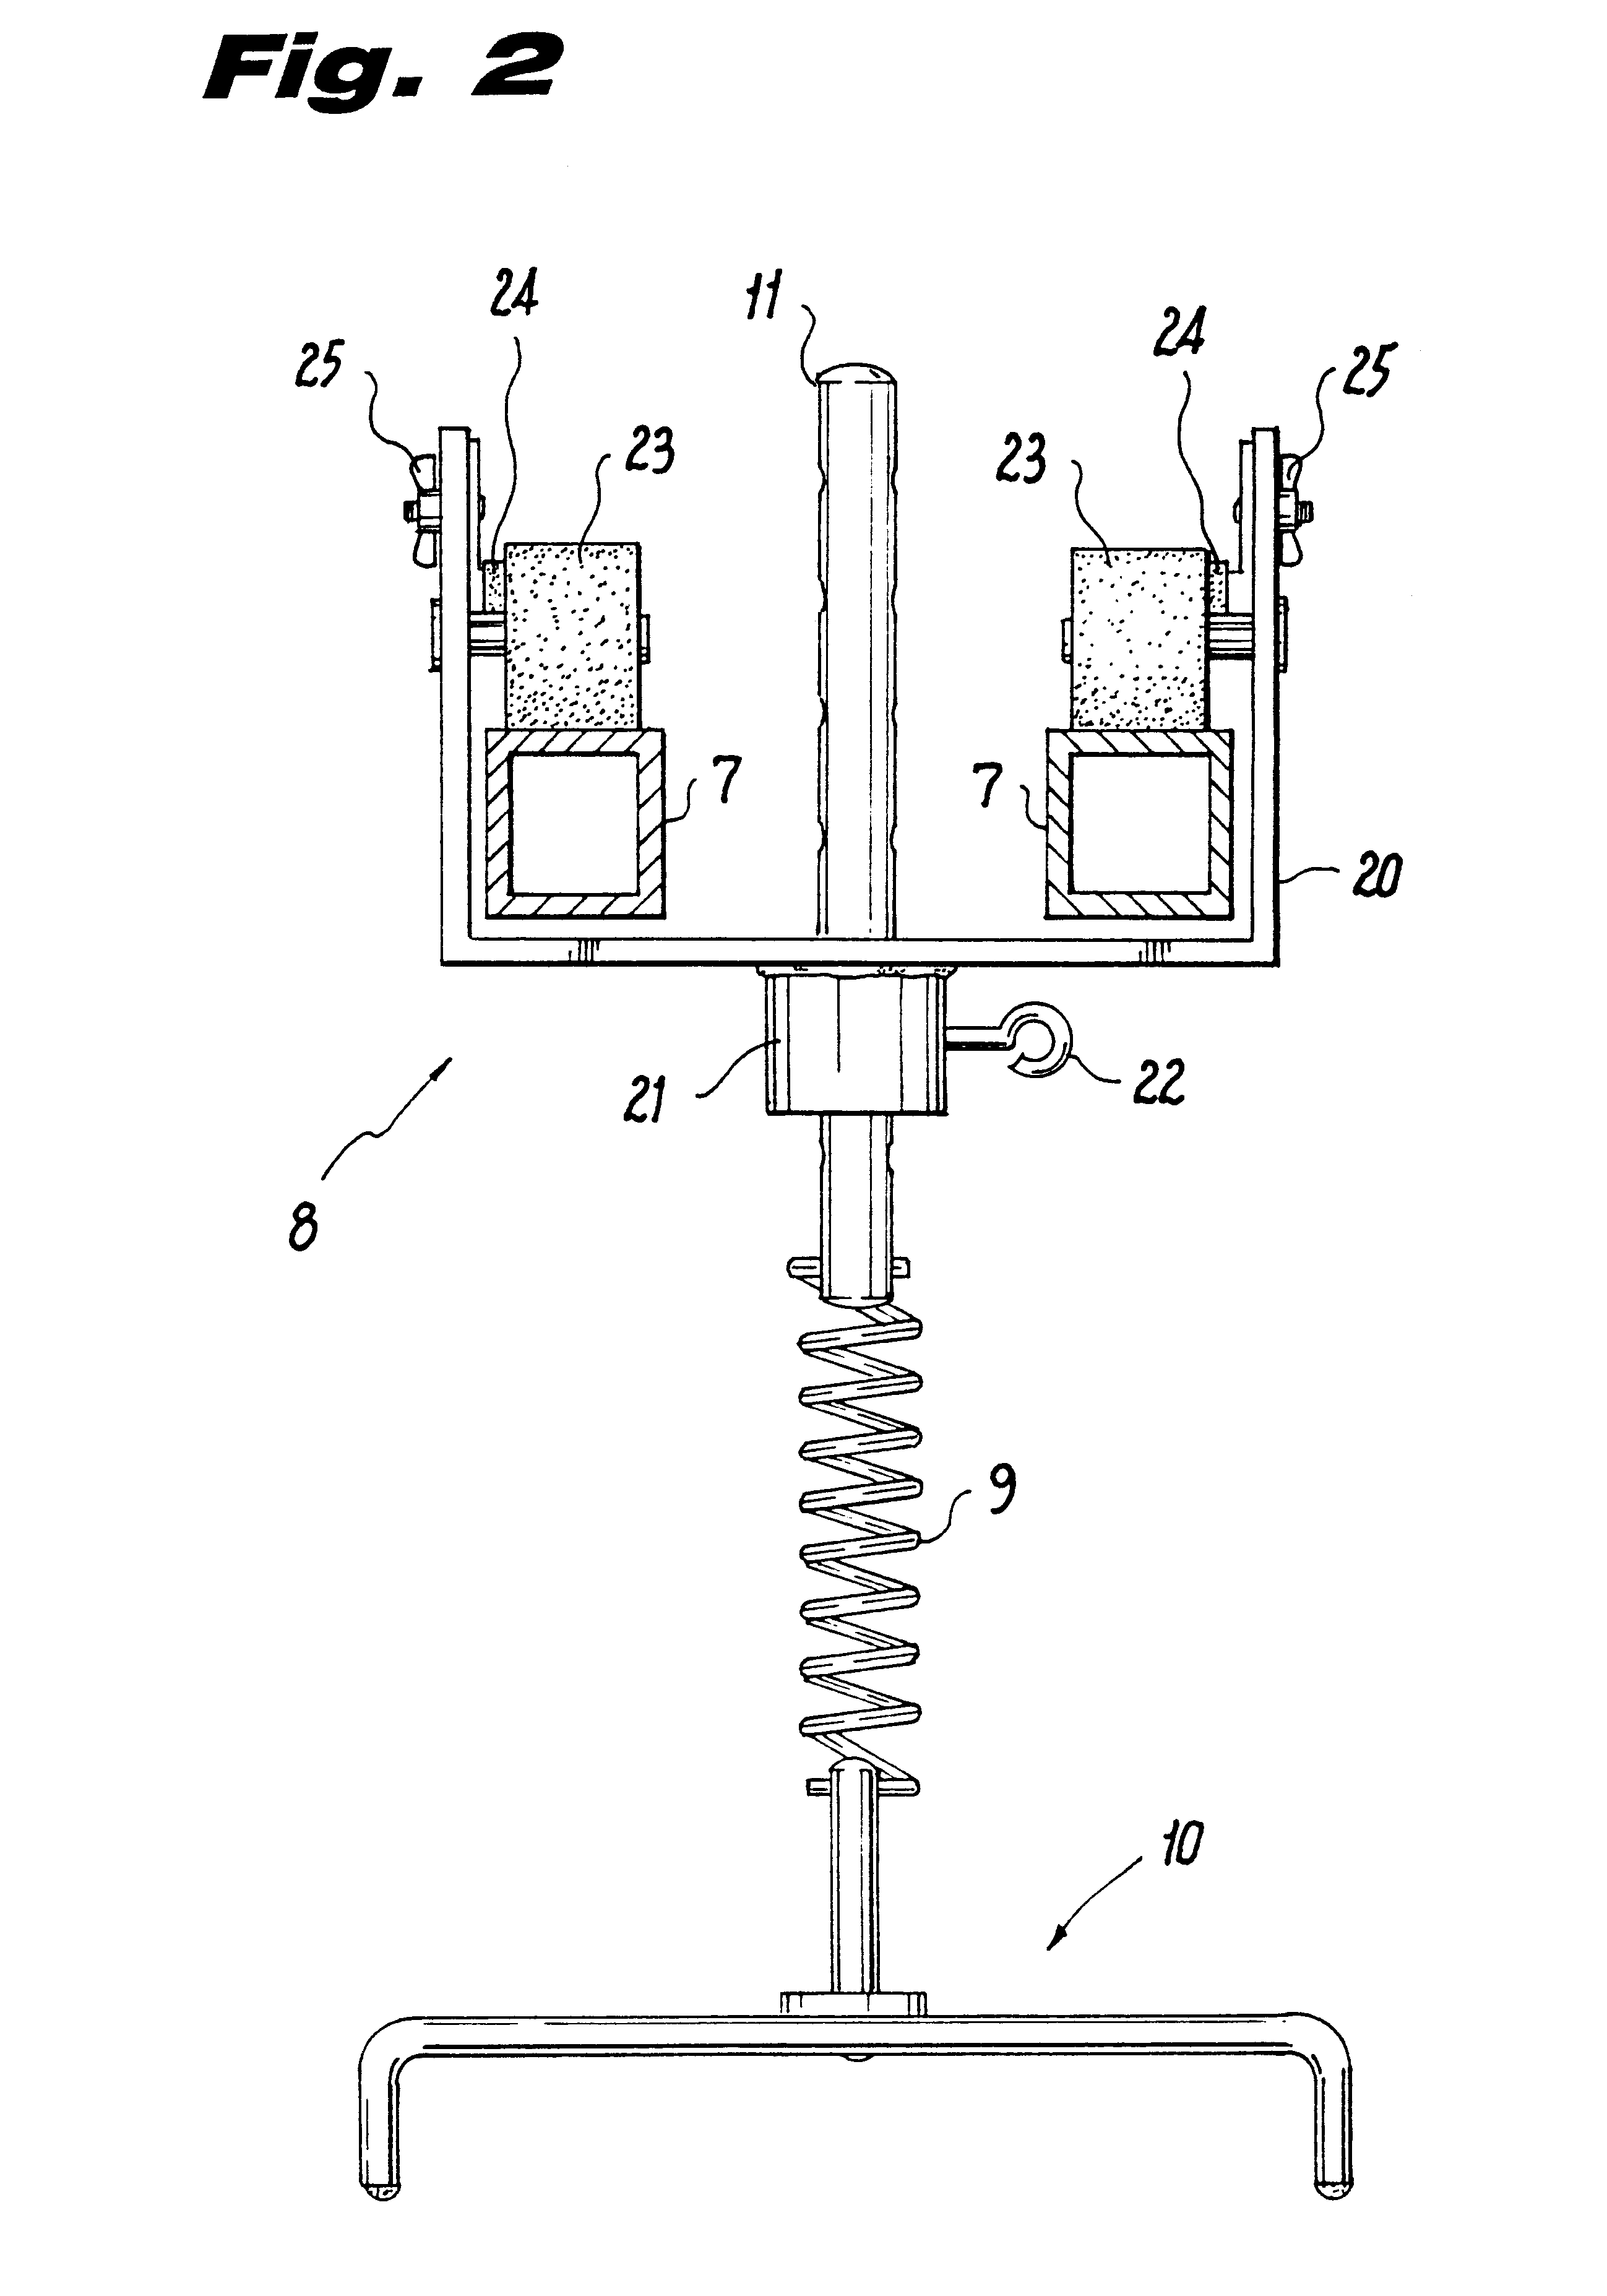 Method and apparatus to exercise developmentally delayed persons